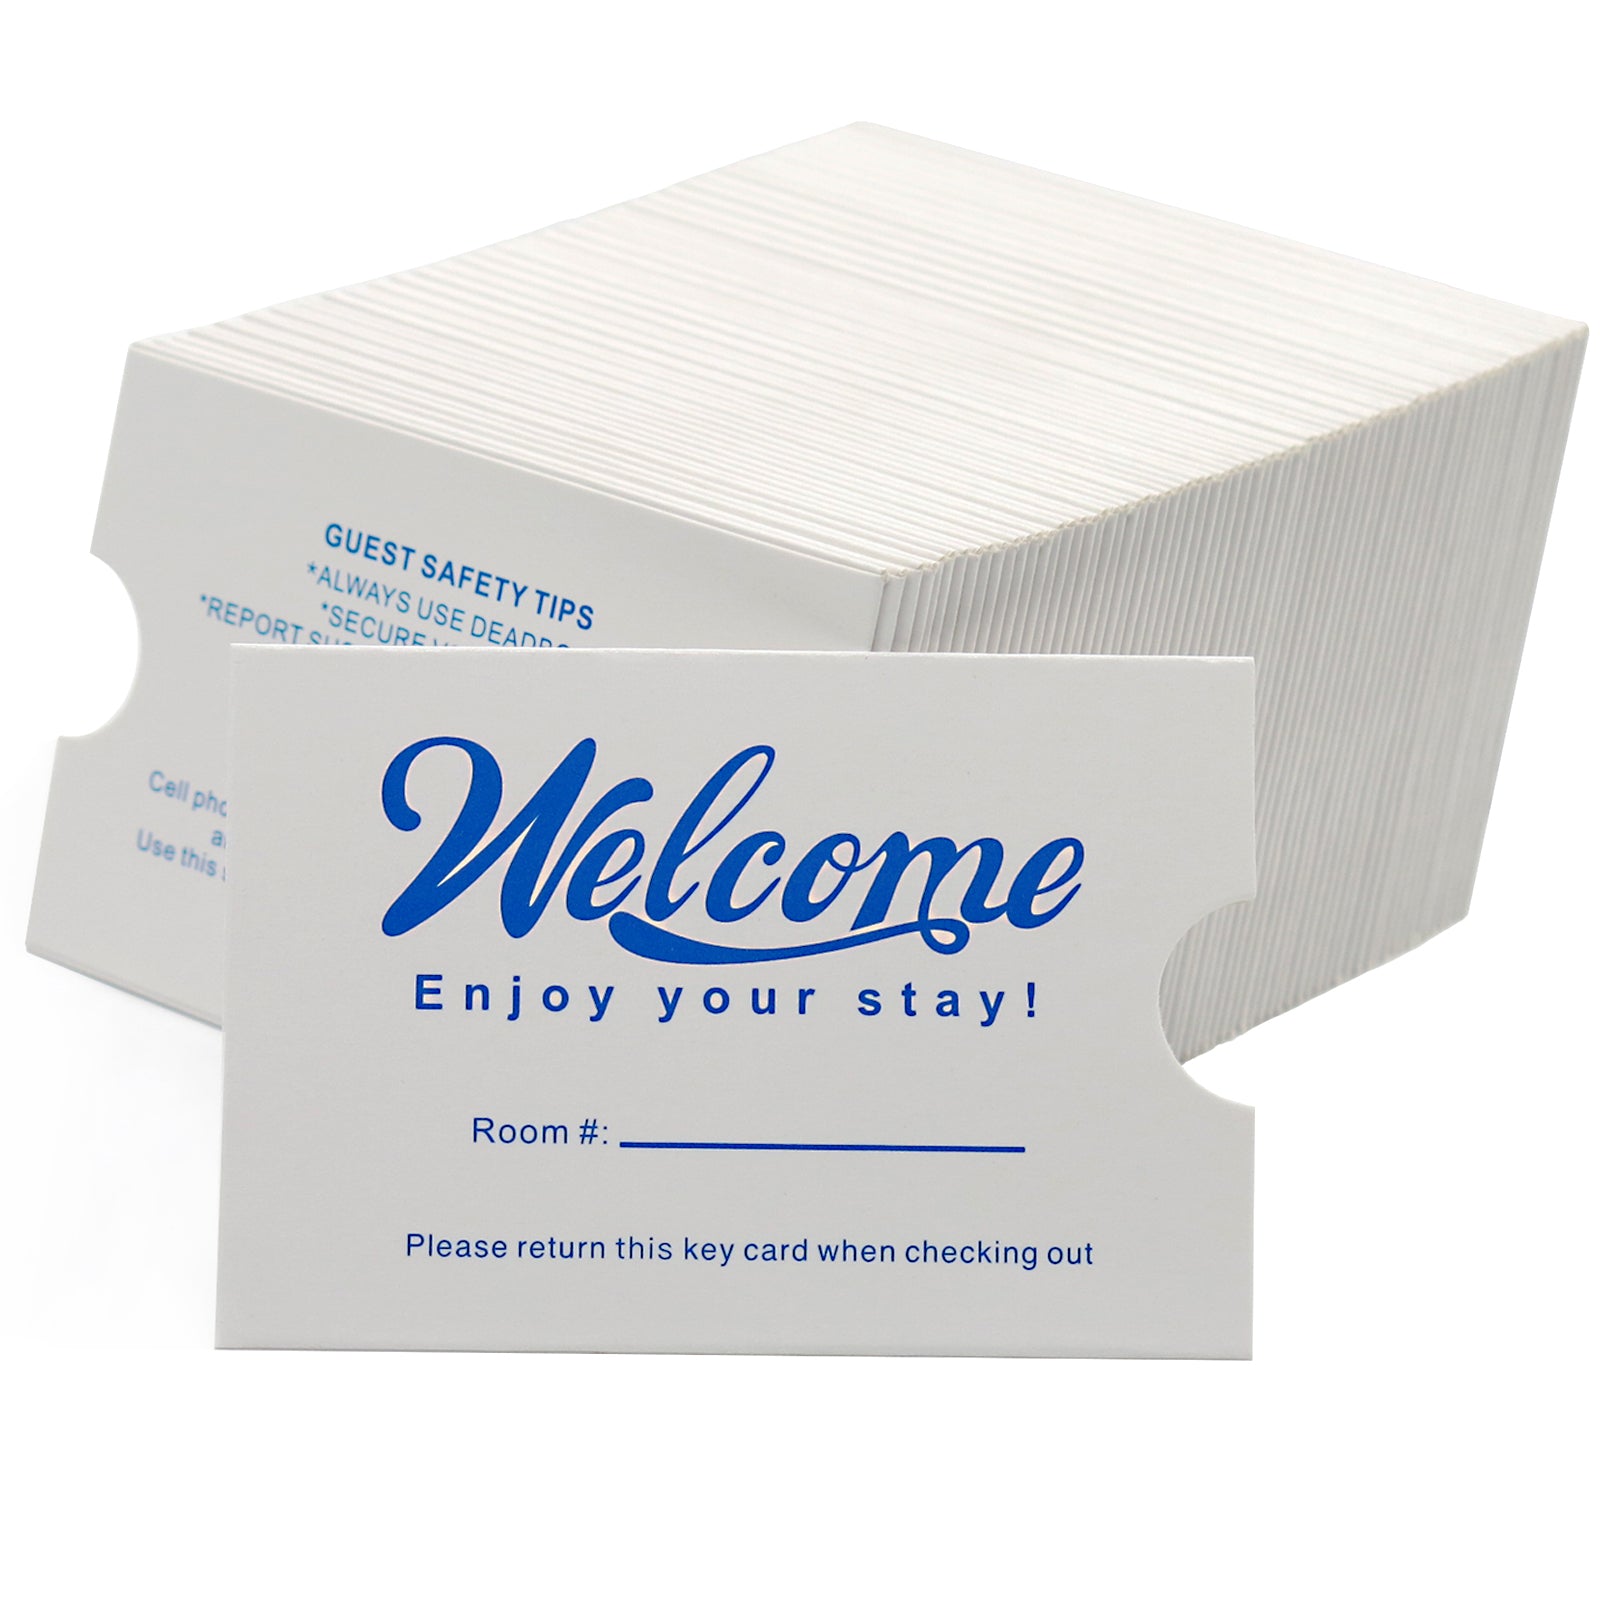 Cashier Depot hotel Keycard Envelope/Sleeve" Welcome Enjoy your stay!" 2-3/8" x 3-1/2" 250-1000 Count